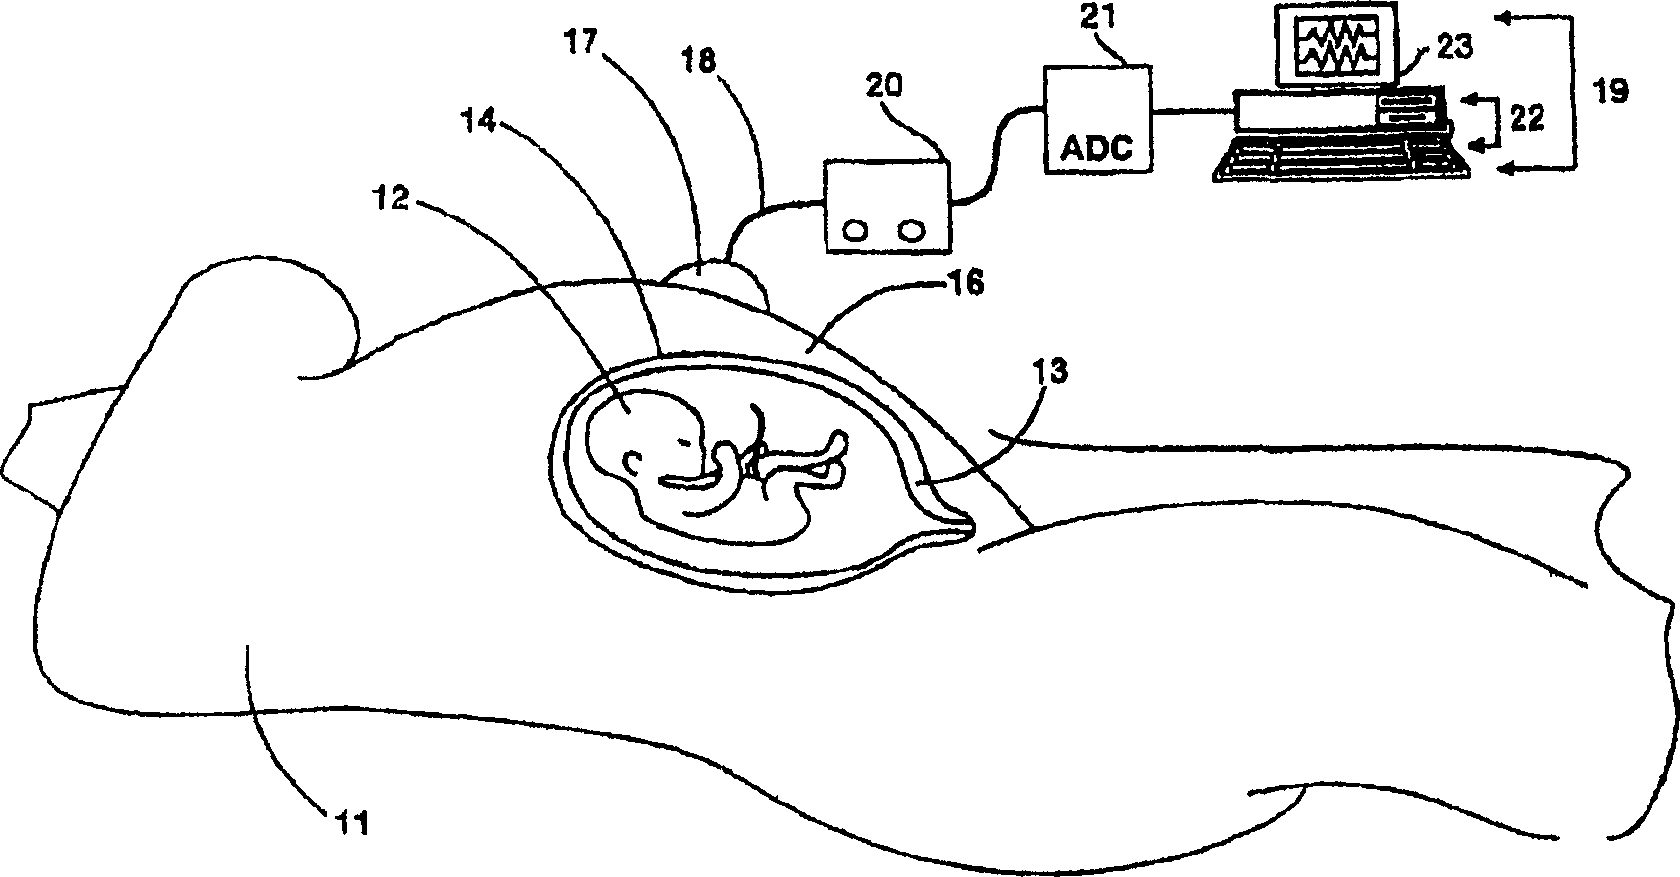 System for detection and analysis of material uterine, material and fetal cardiac and fetal brain activity